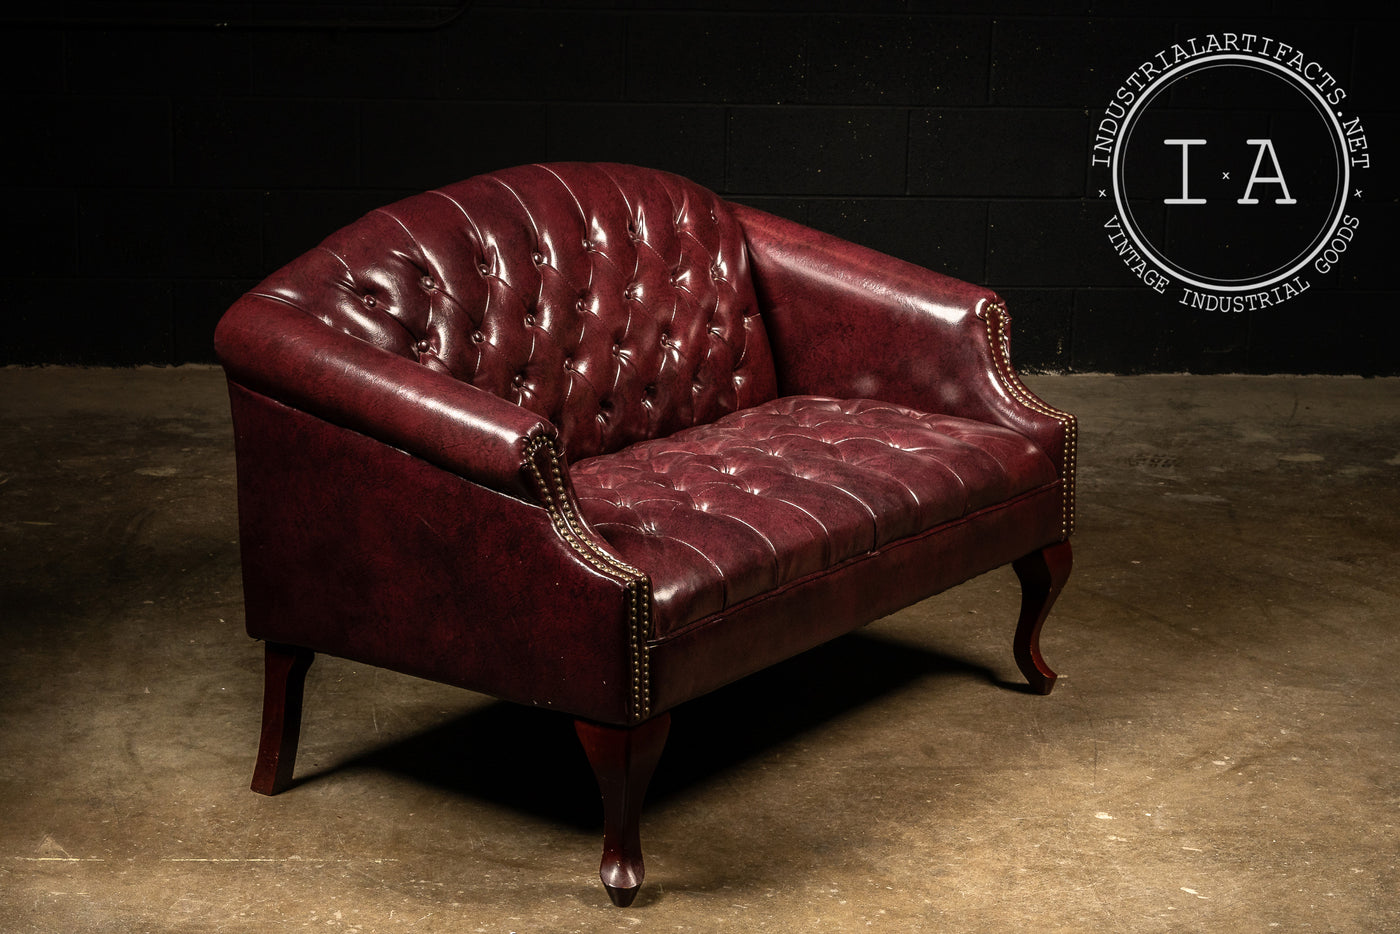 Vintage Tufted Leather Loveseat in Burgundy